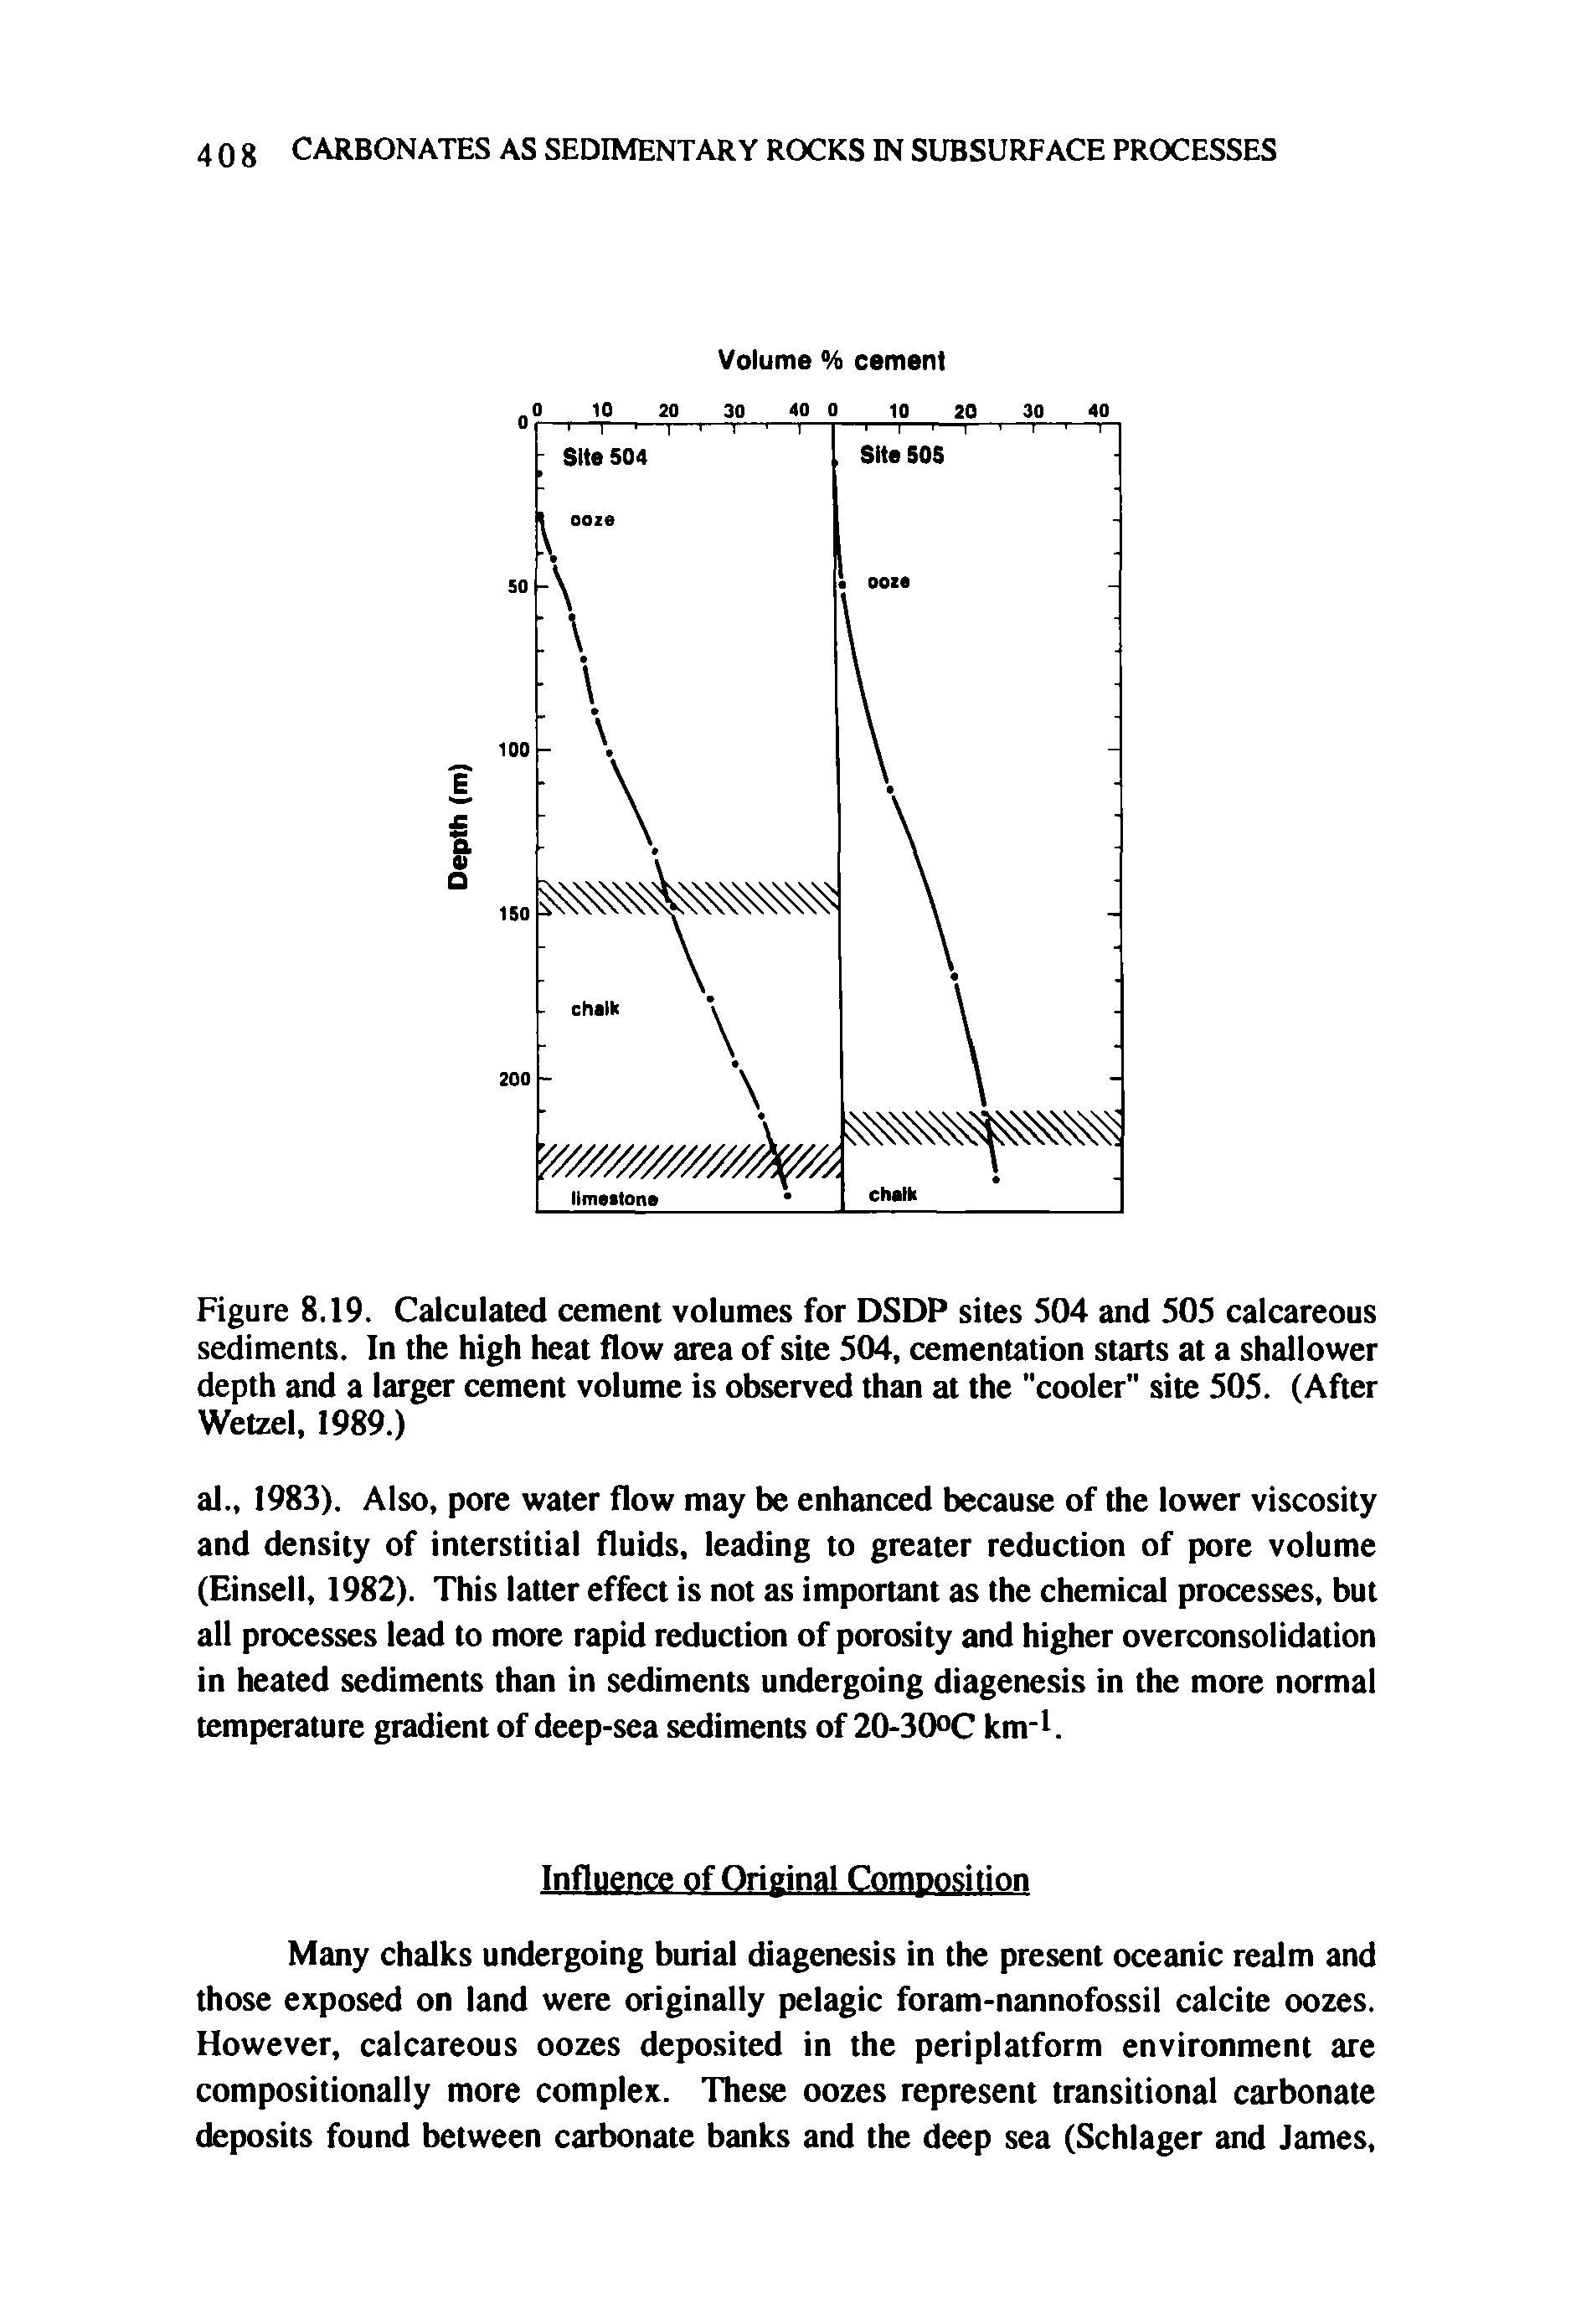 Figure 8.19. Calculated cement volumes for DSDP sites 504 and 505 calcareous sediments. In the high heat flow area of site 504, cementation starts at a shallower depth and a larger cement volume is observed than at the "cooler" site 505. (After Wetzel, 1989.)...